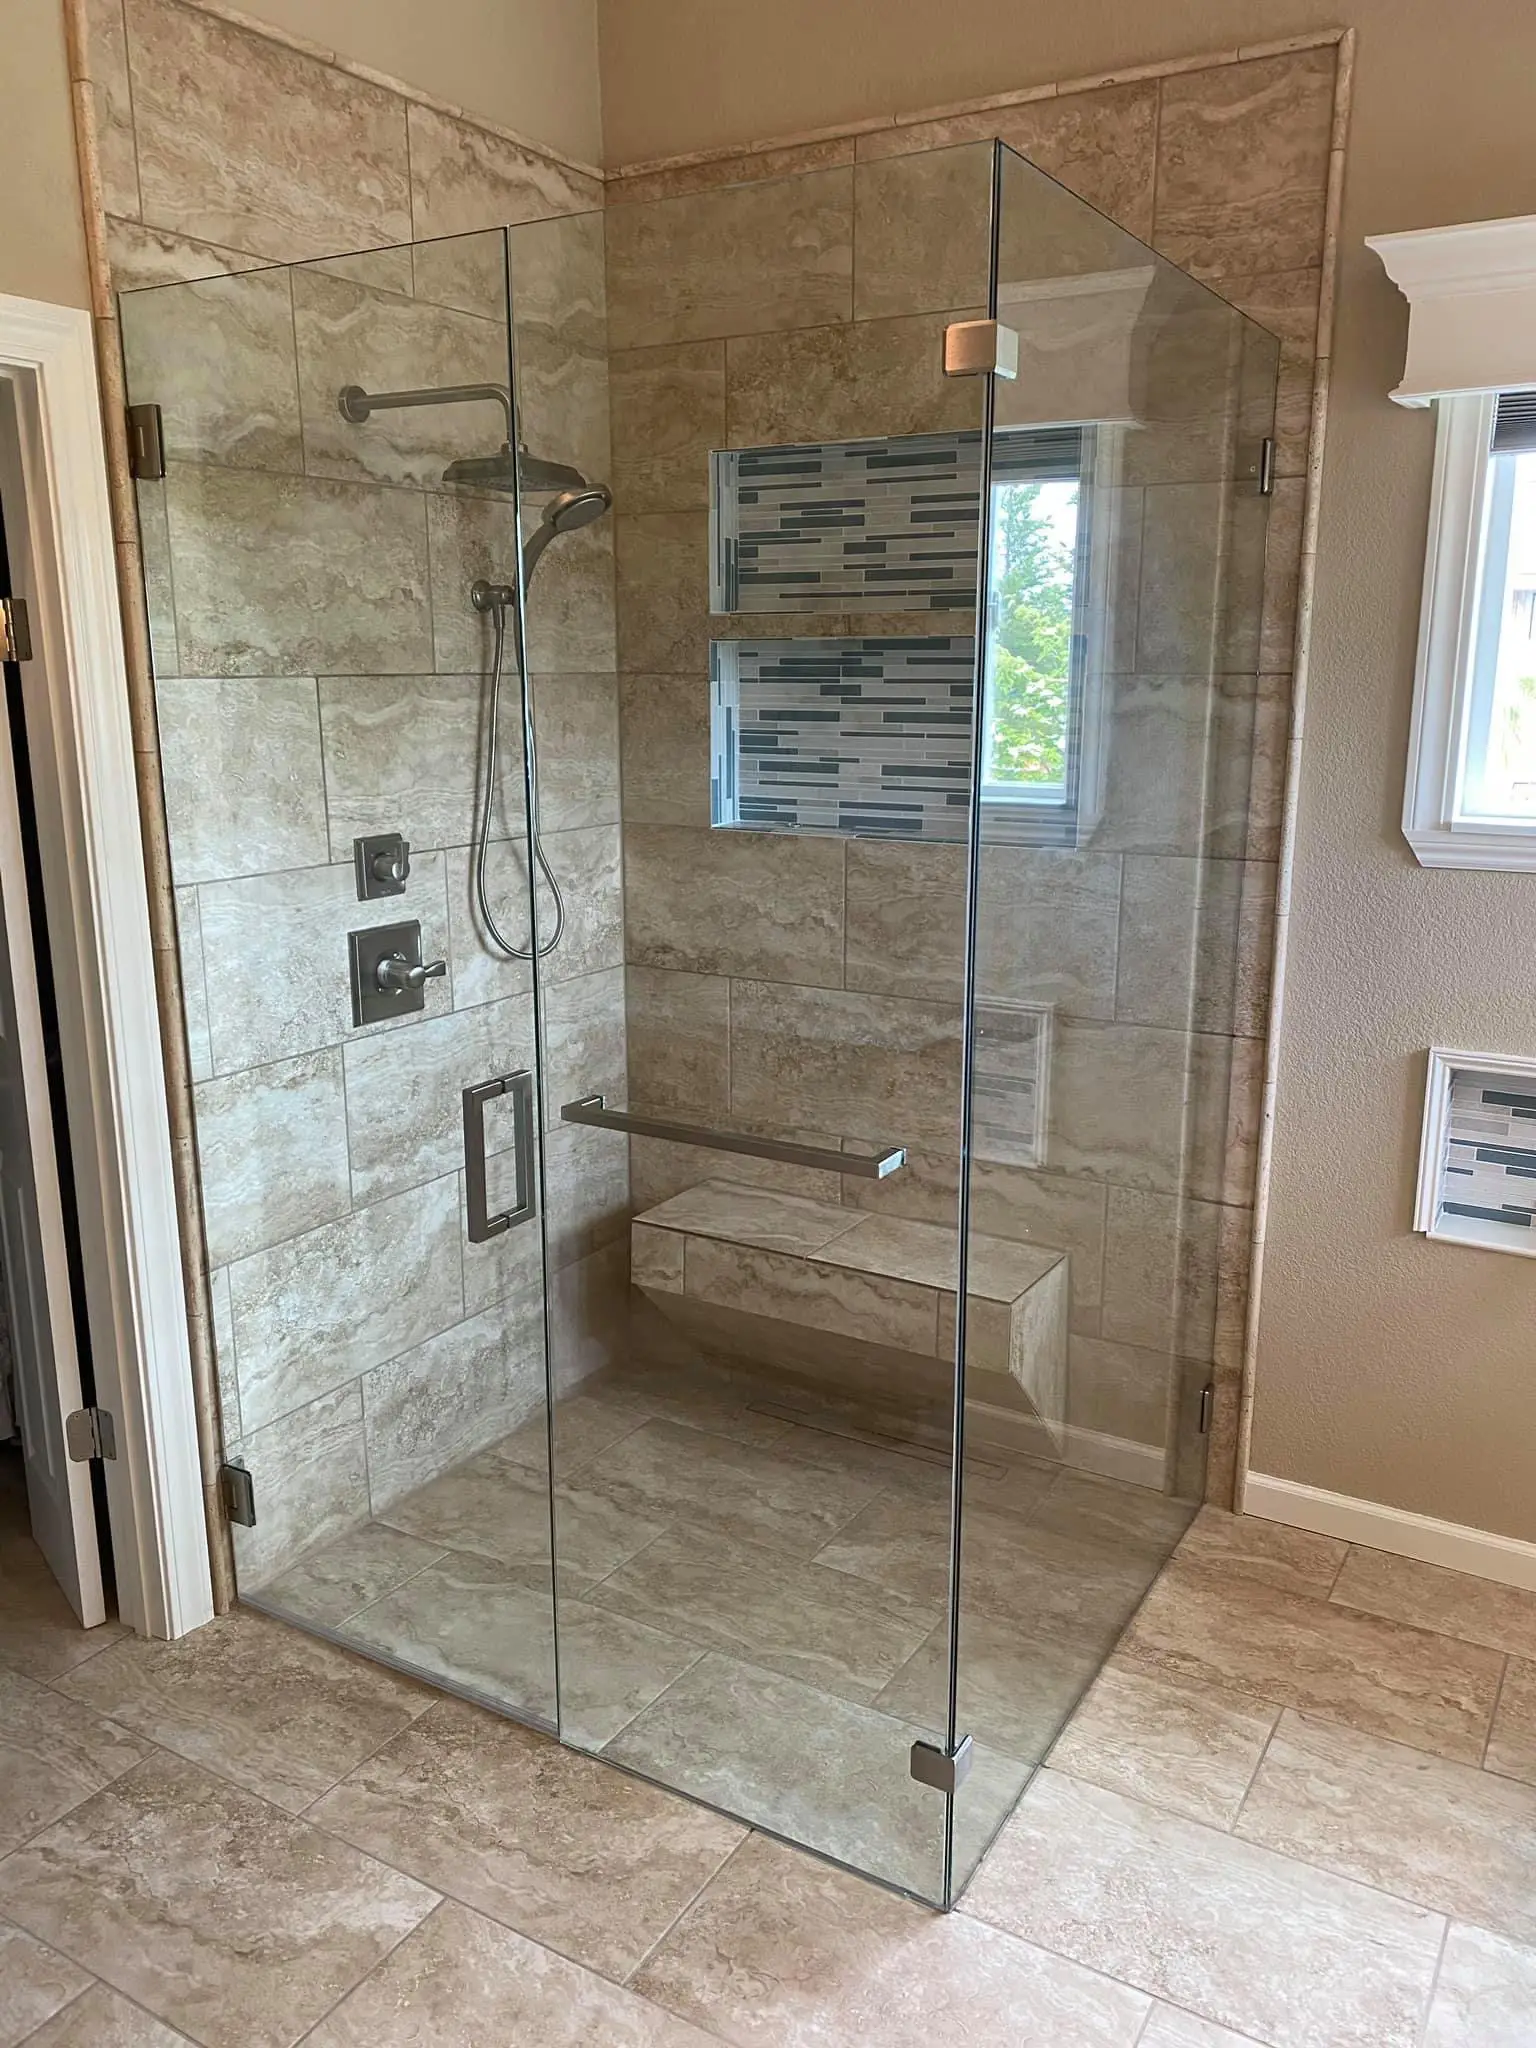 Clear square glass shower enclosure.